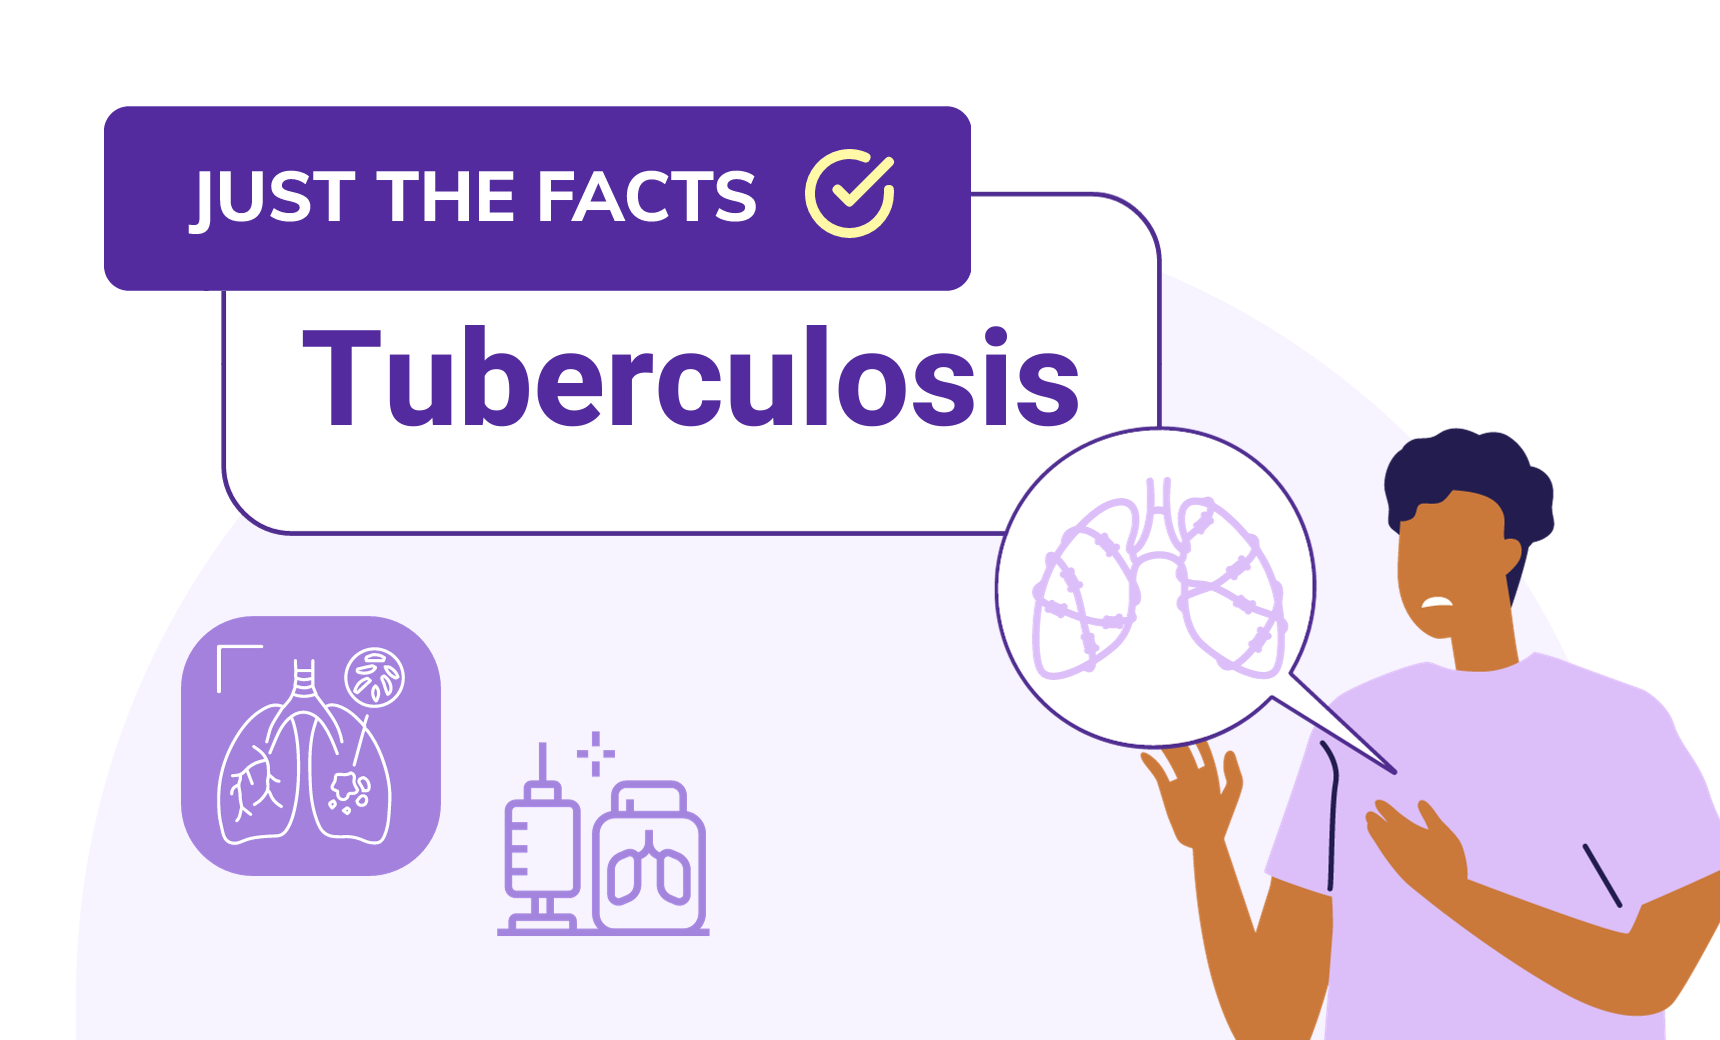 Just the Facts: Tuberculosis